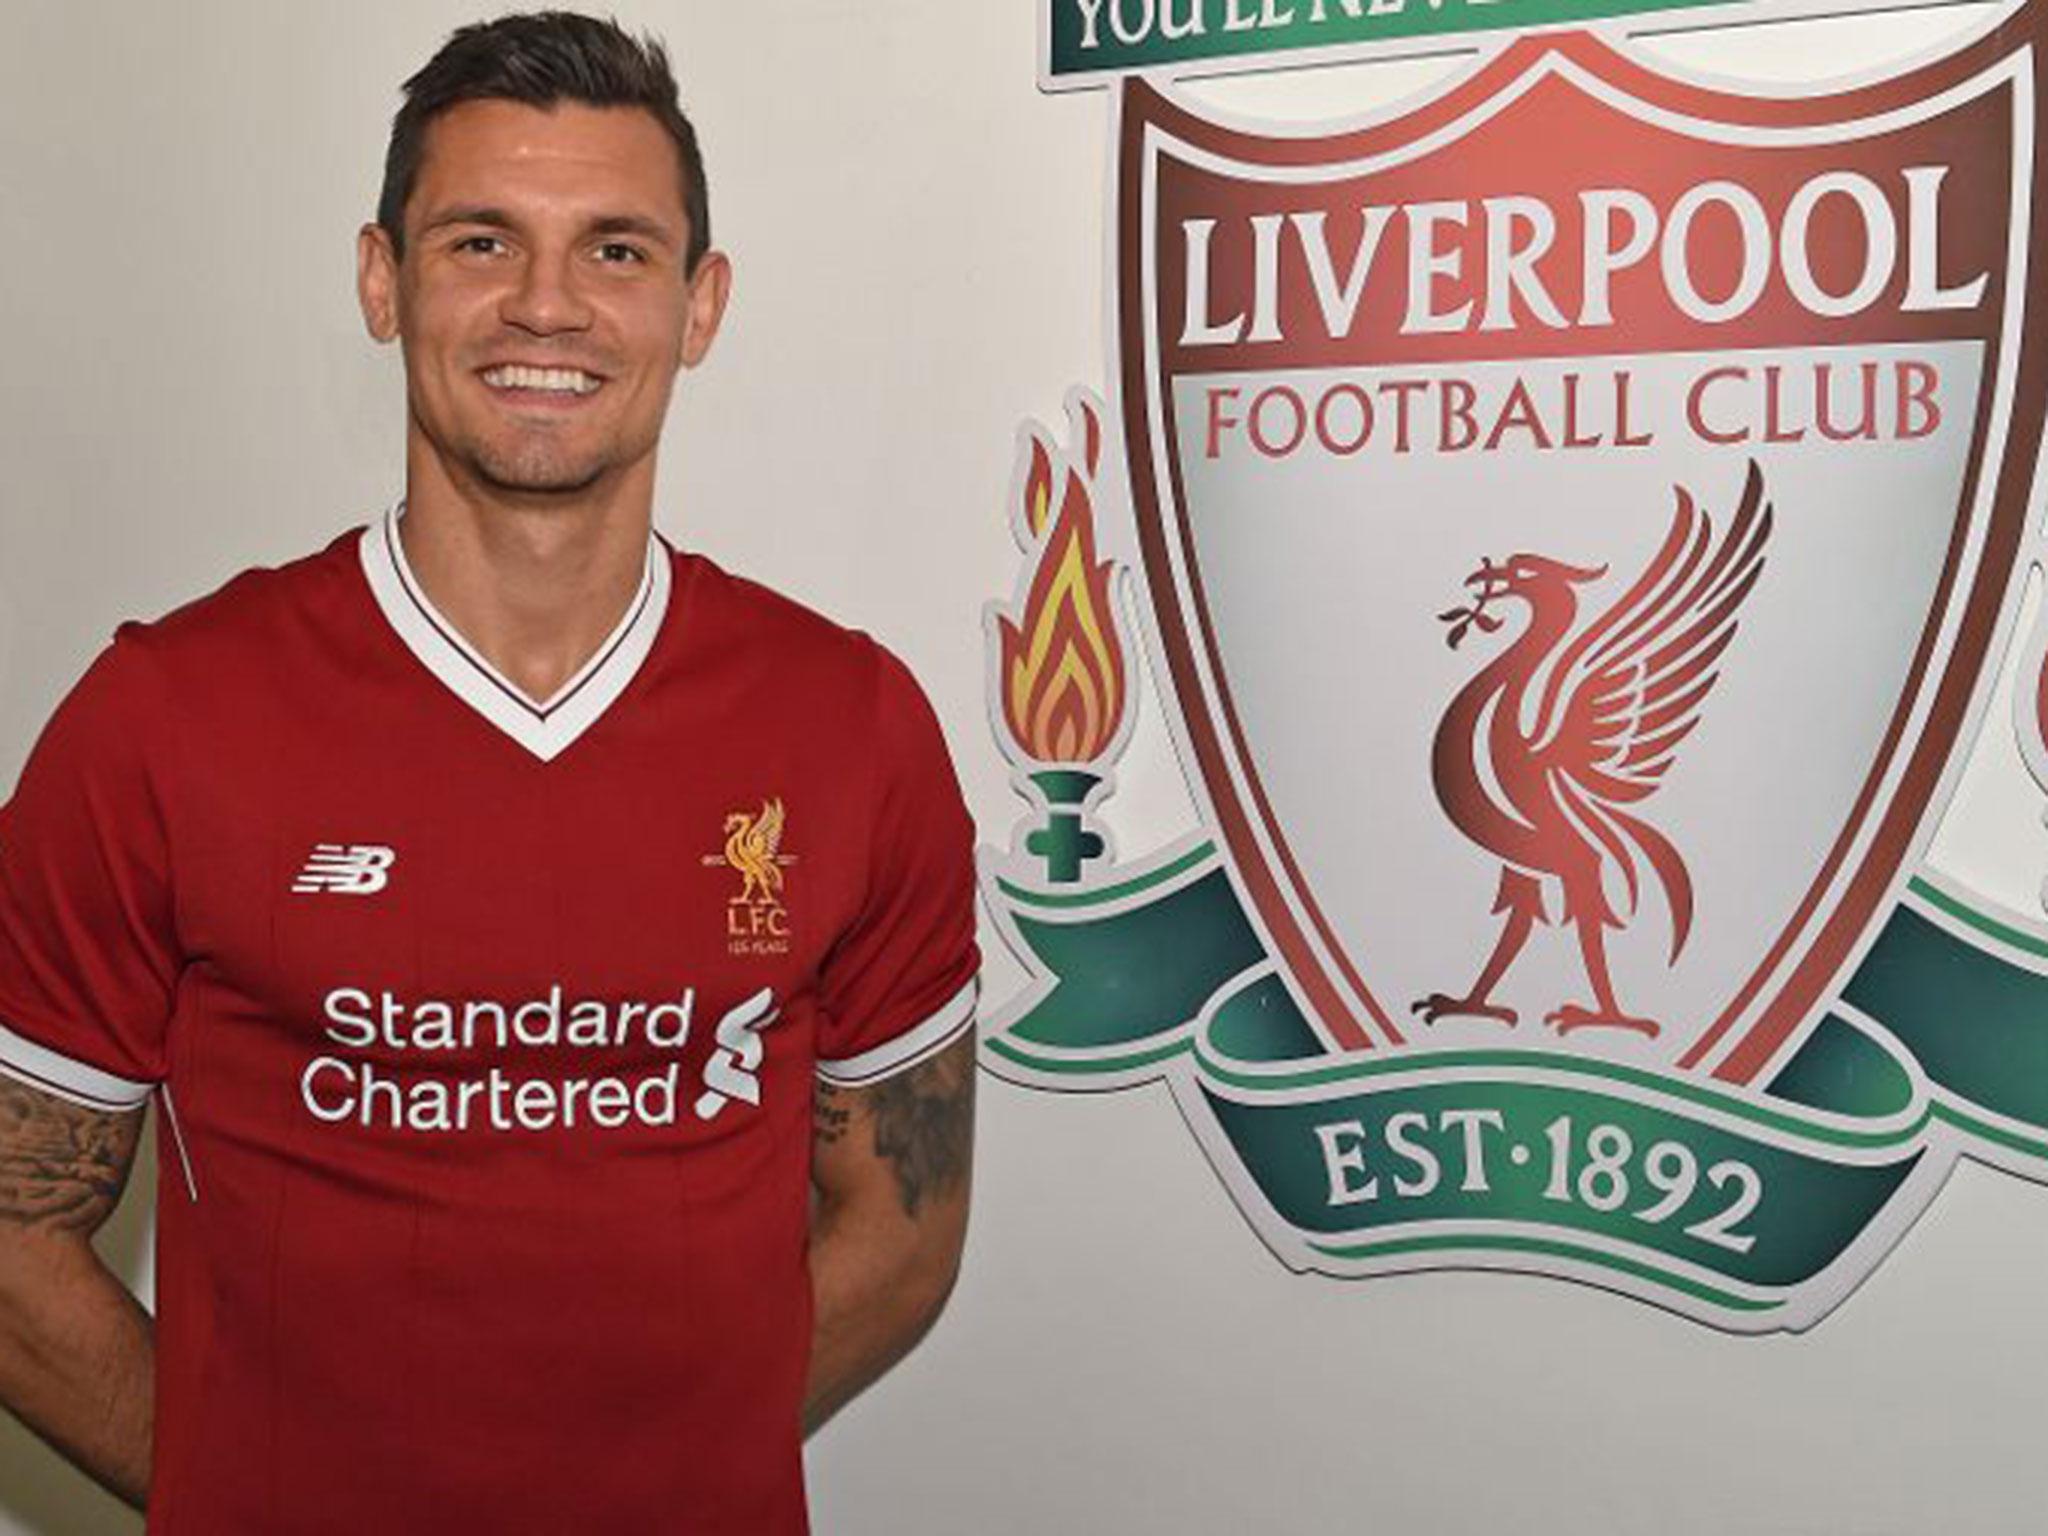 Dejan Lovren has signed a new contract until 2021 with Liverpool